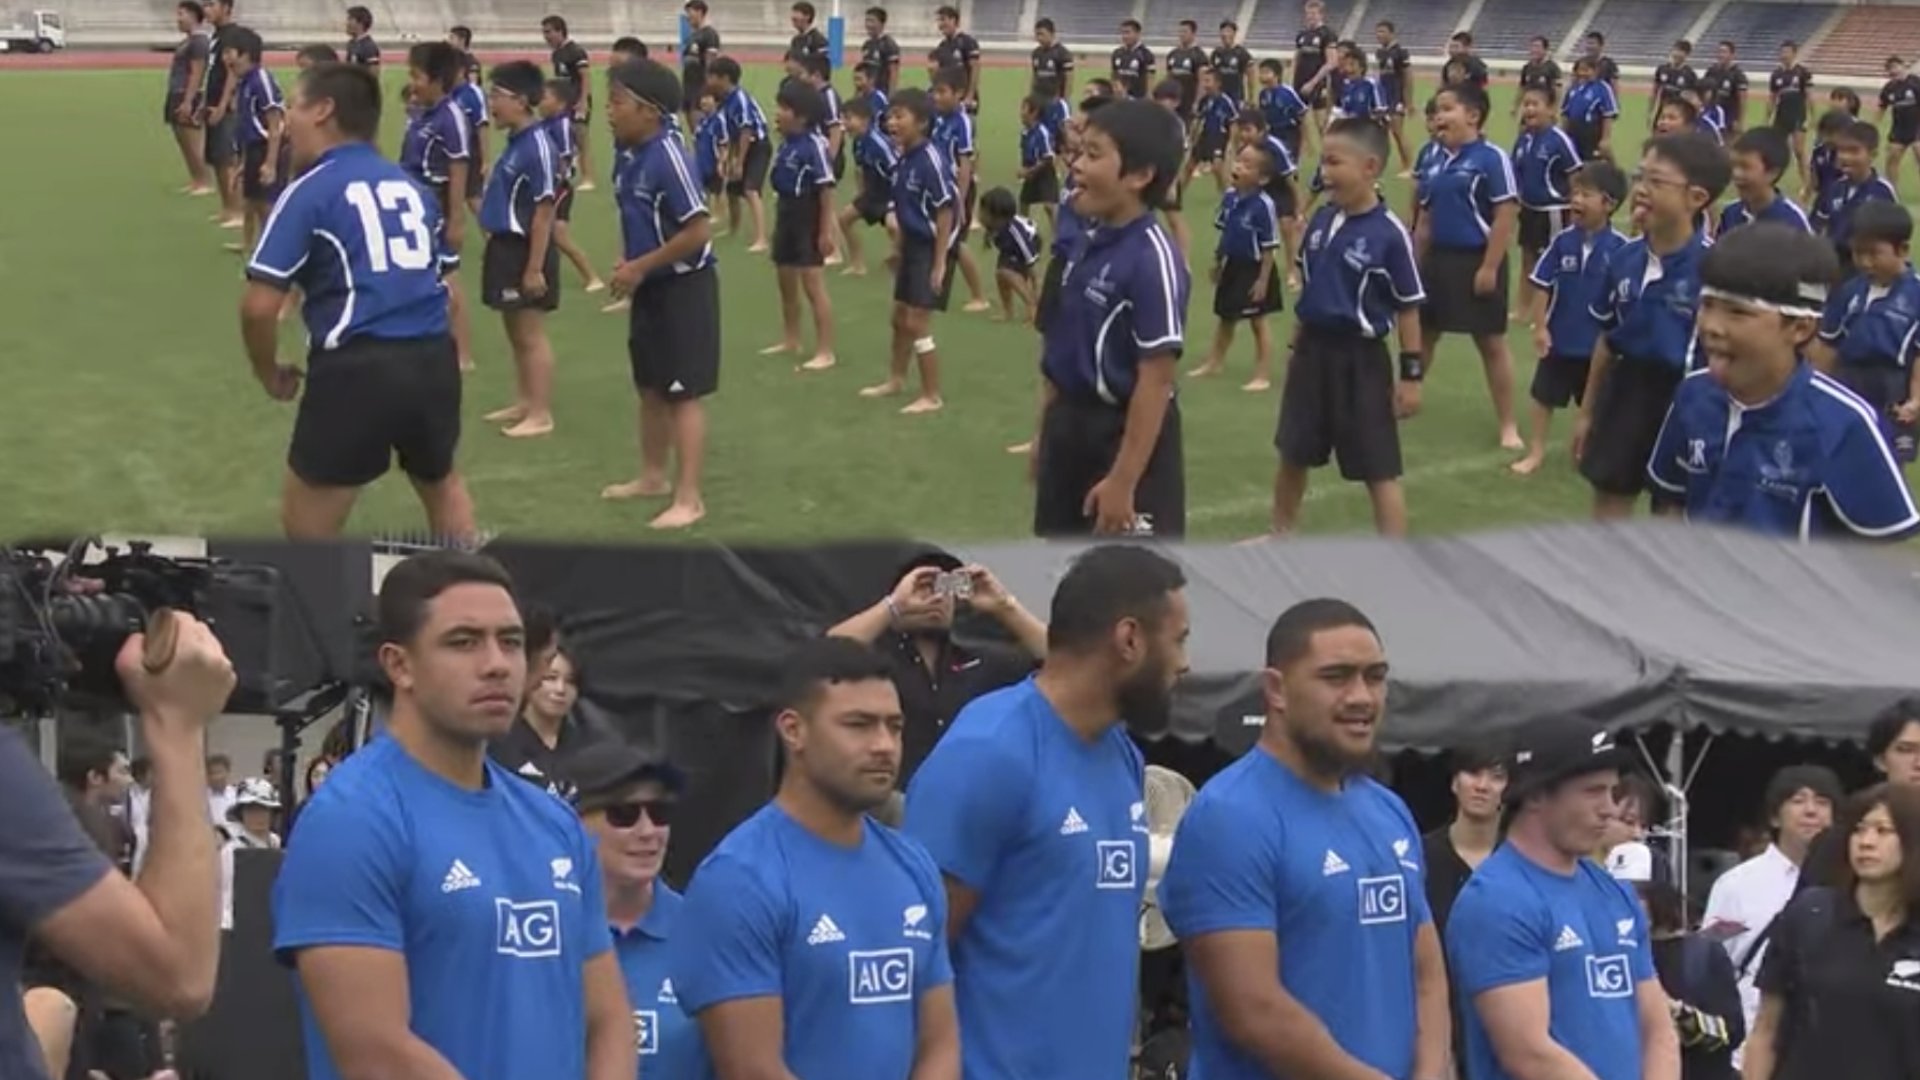 Japanese children perform seriously impressive haka in front of All Blacks